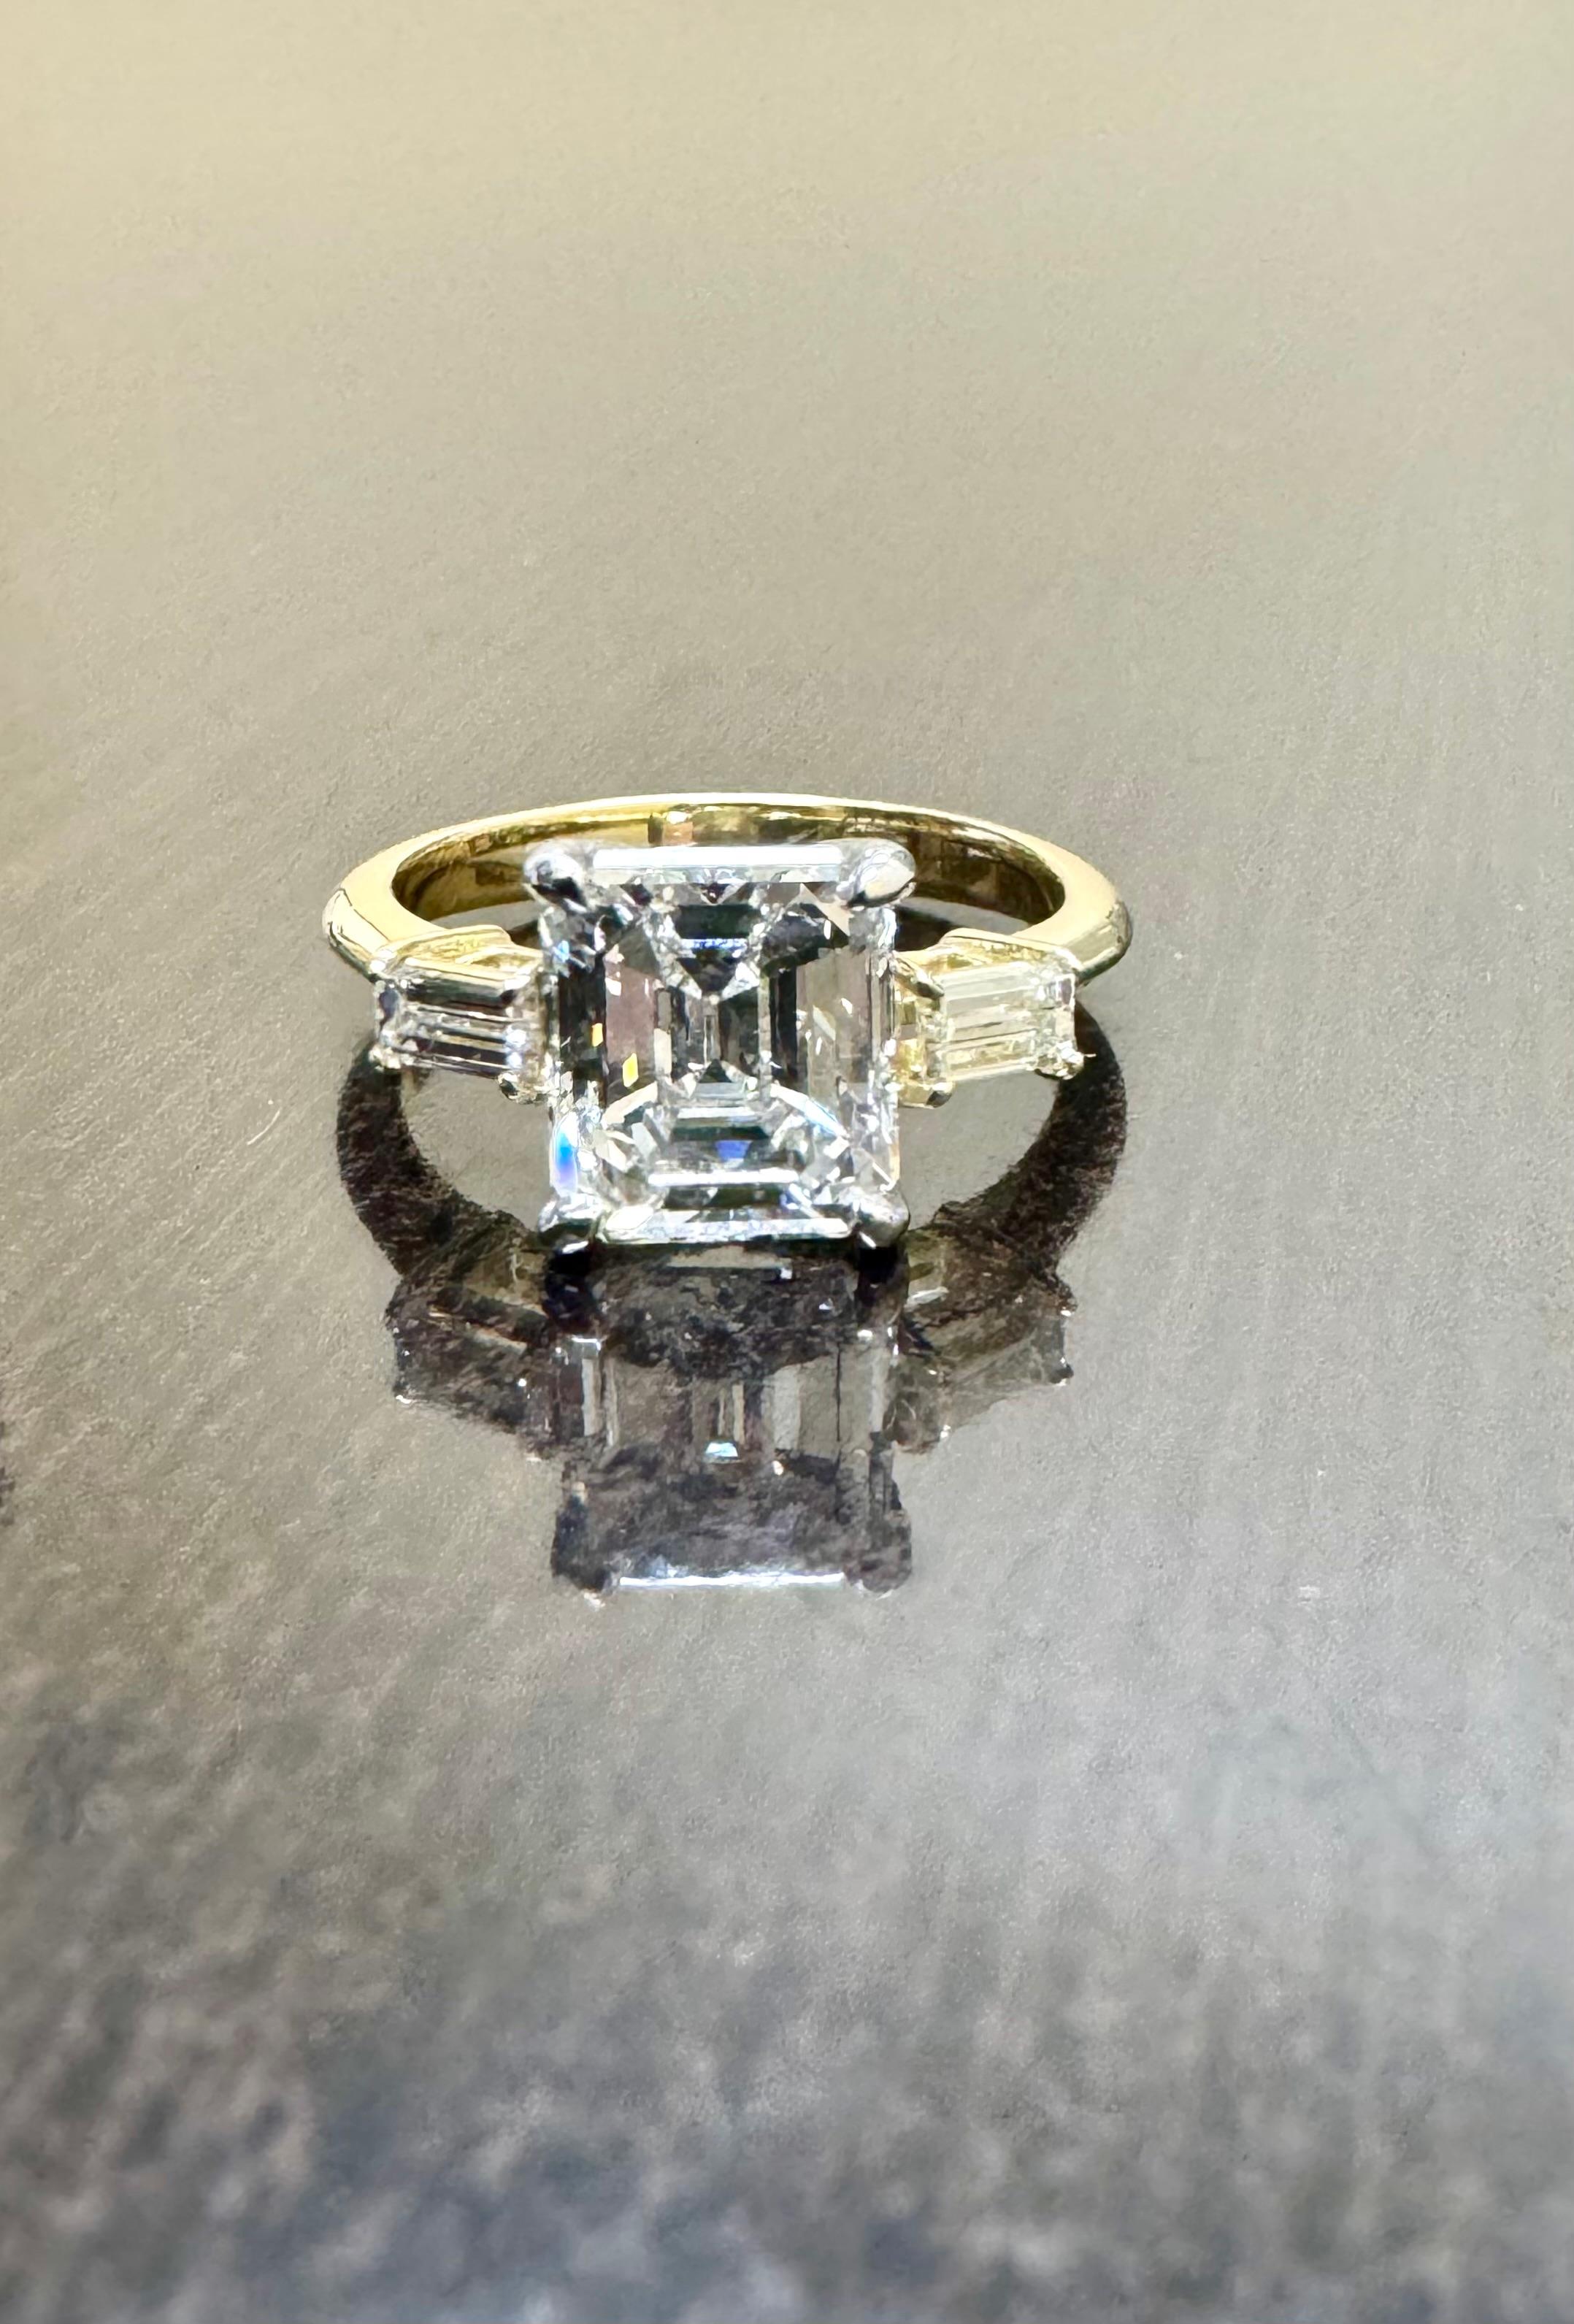 Vintage Art Deco GIA Certified 2.41 Carat Emerald Cut Diamond Engagement Ring In New Condition For Sale In Los Angeles, CA